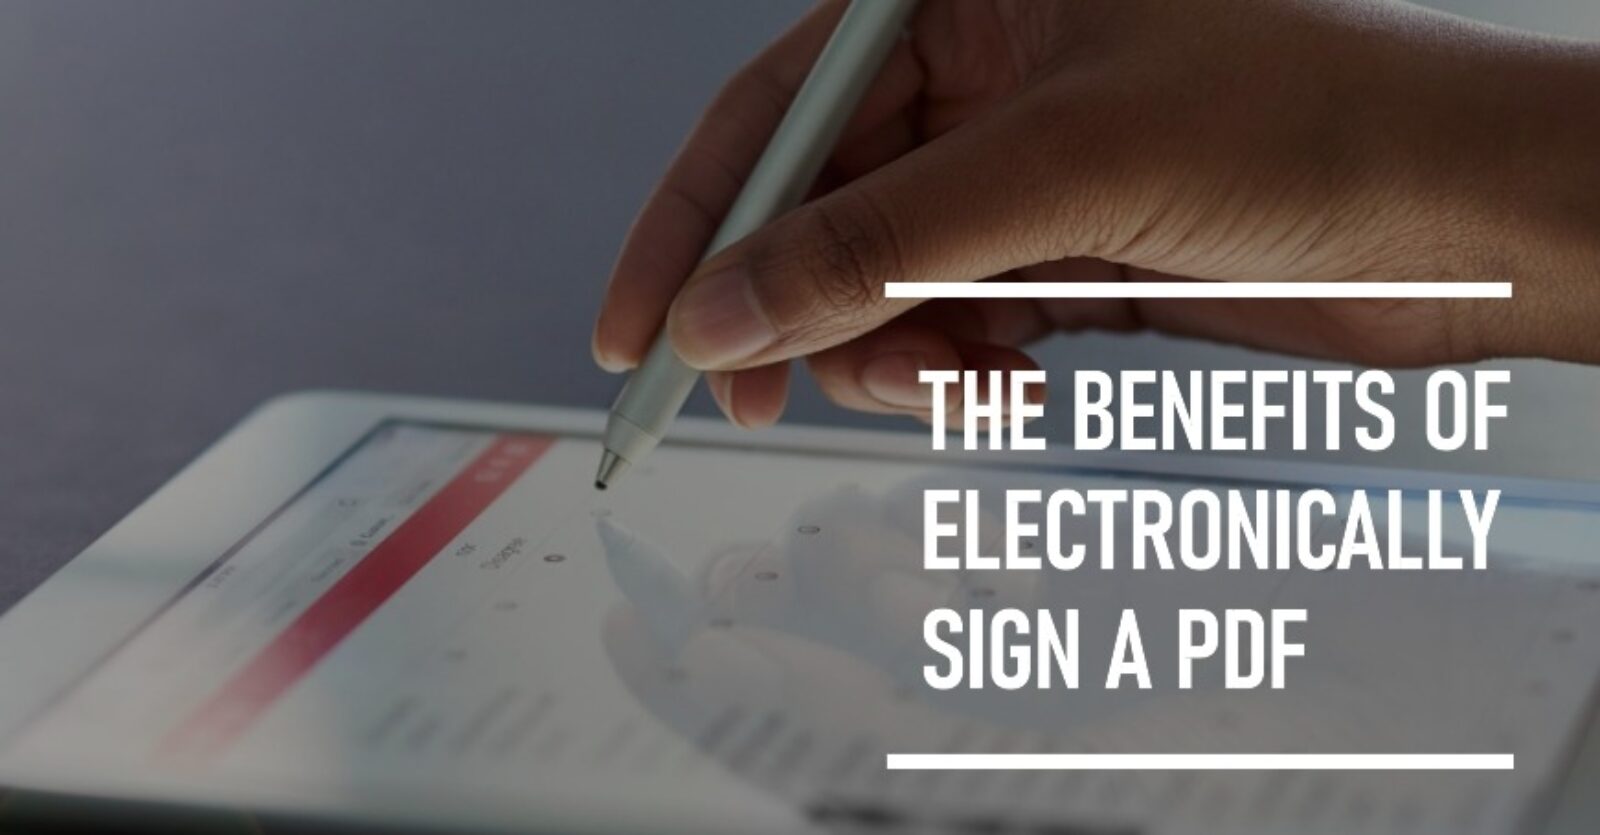 The Benefits of Electronically Sign a PDF